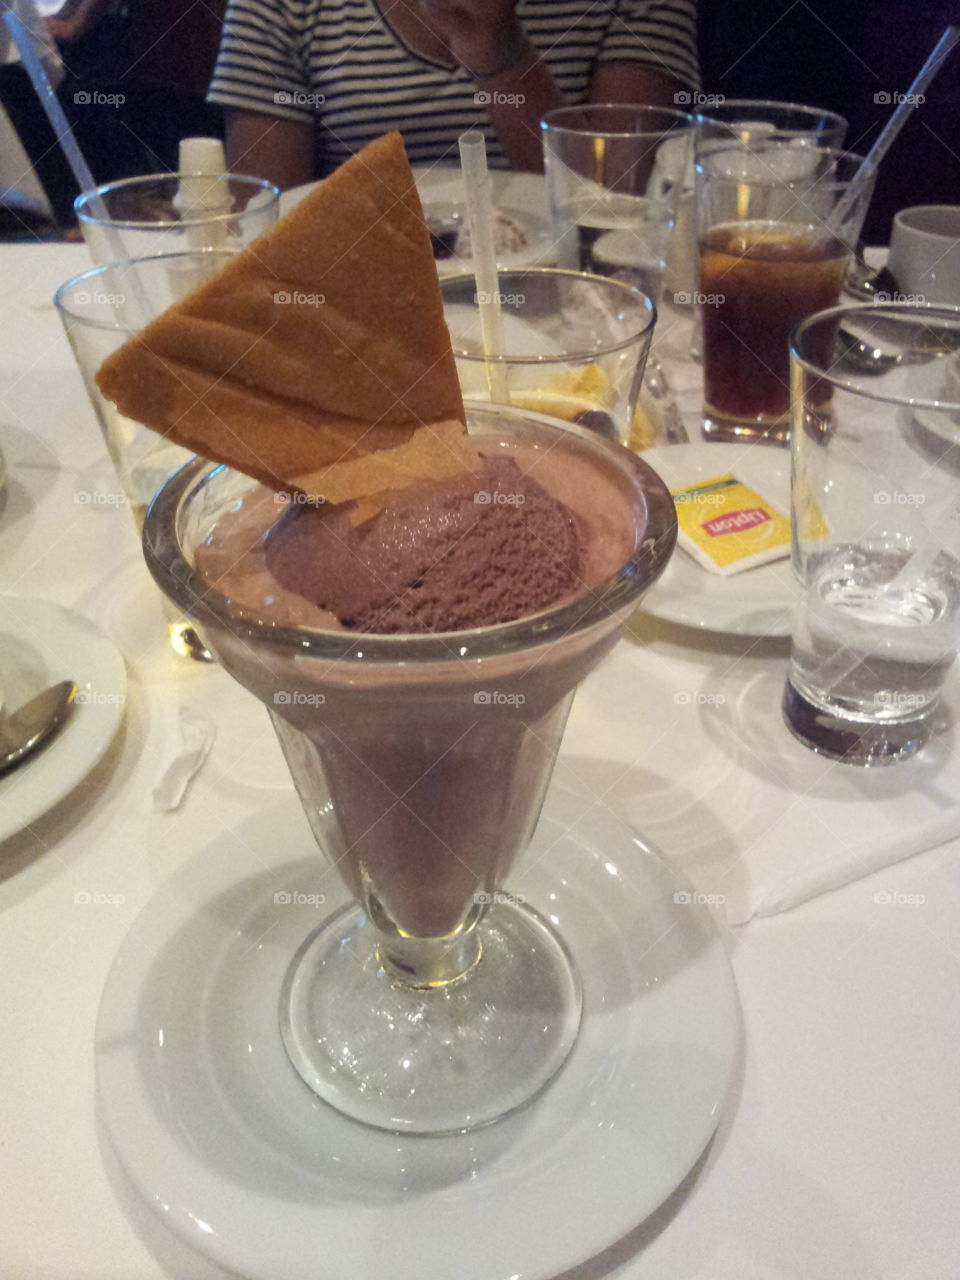 Chocolate ice cream with wafer chip 